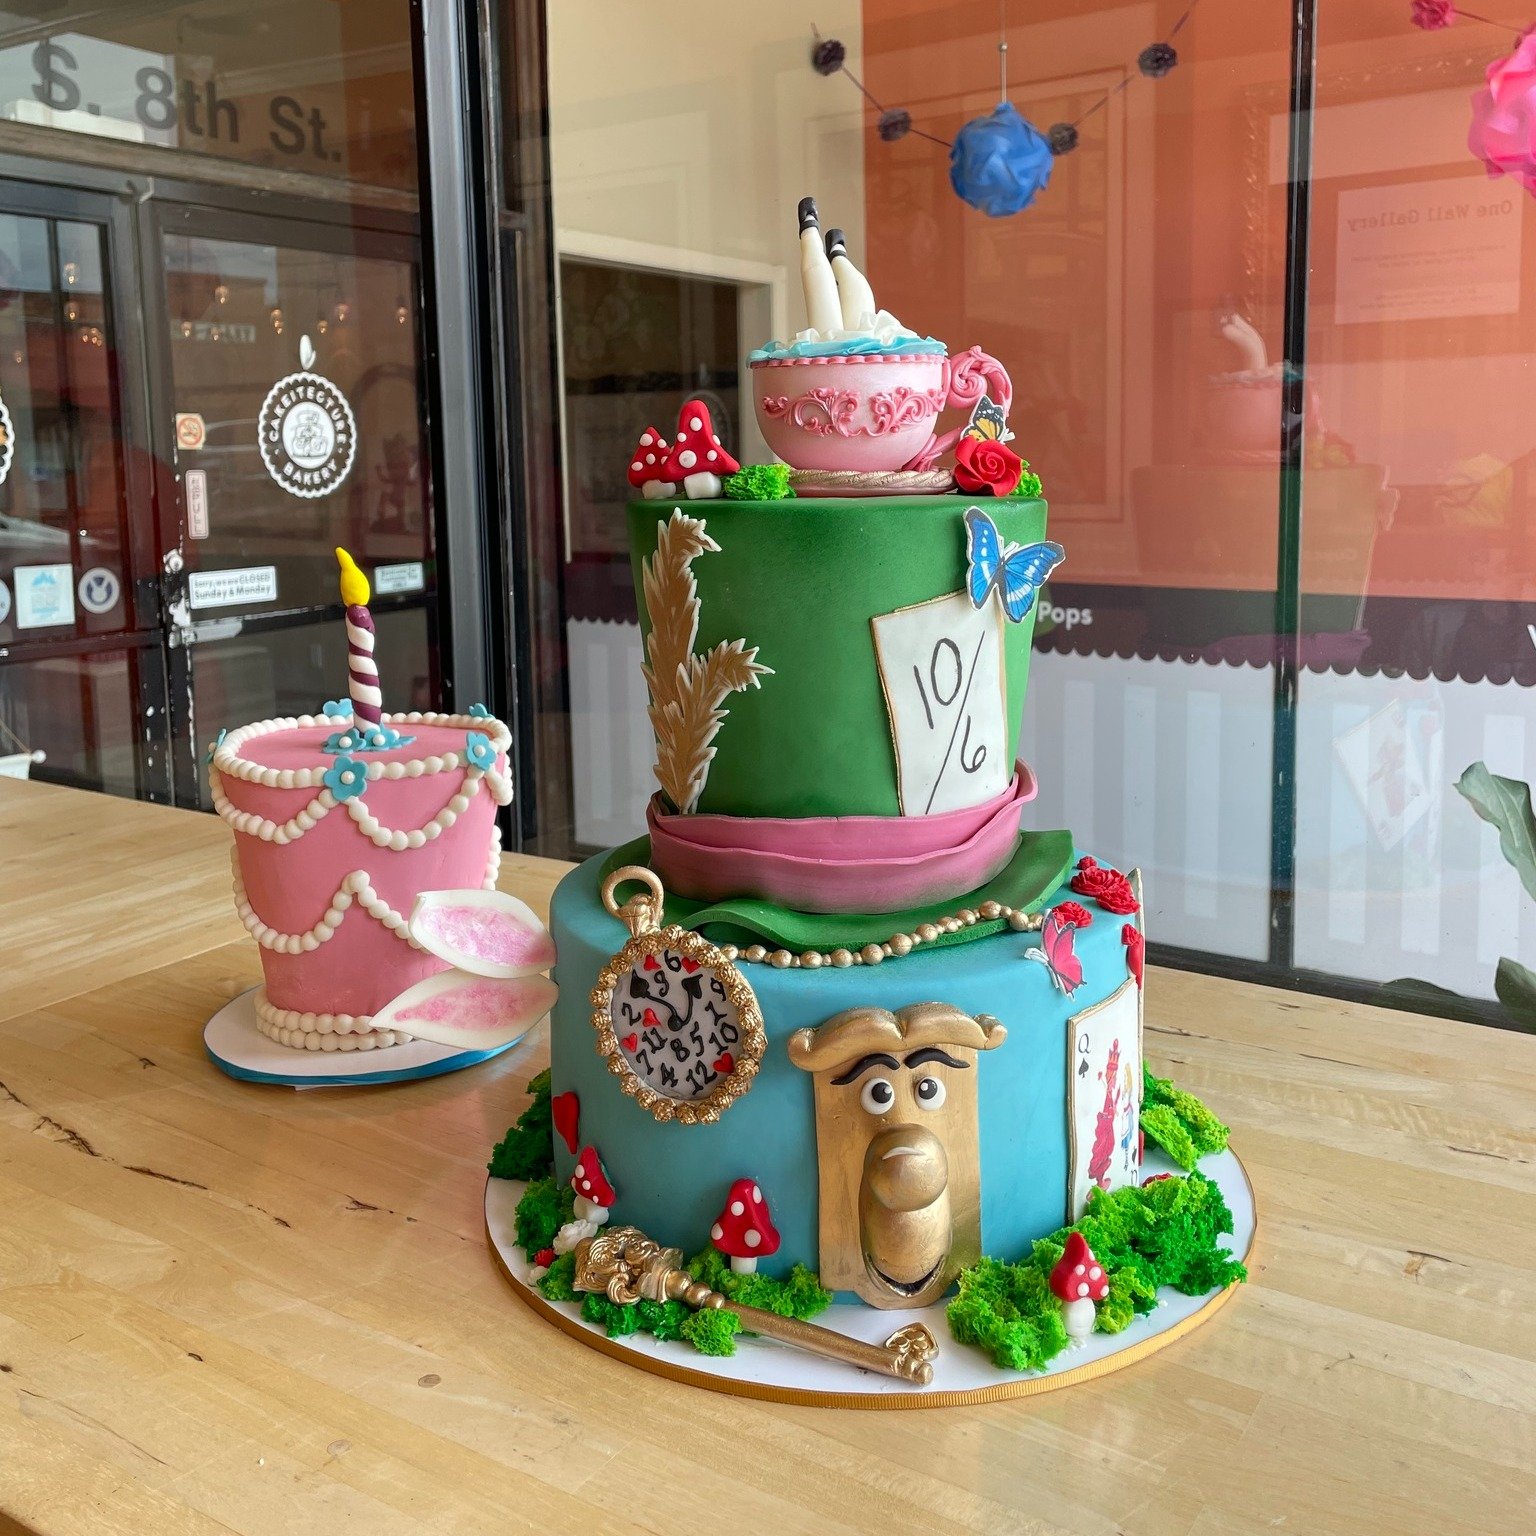 &quot;She began to believe that very few things are indeed impossible&quot;- Alice in Wonderland, Lewis Carroll🐰🫖🎩 These Happy Birthday in ONE-DERLAND cakes were so much fun to make! #Auburn #opelika #bakery #cakeitecturebakery  #customcakes #wond